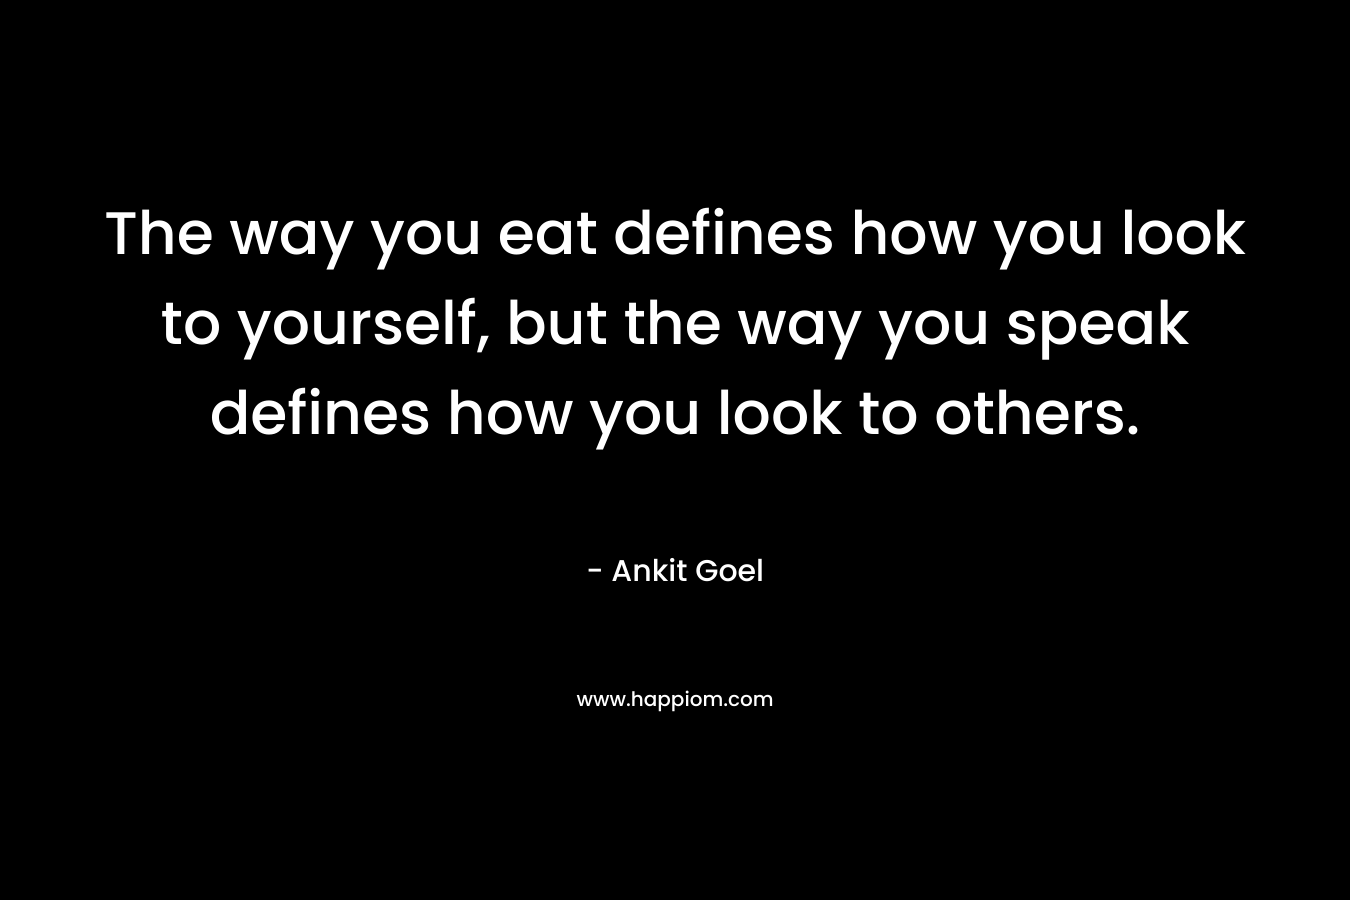 The way you eat defines how you look to yourself, but the way you speak defines how you look to others.